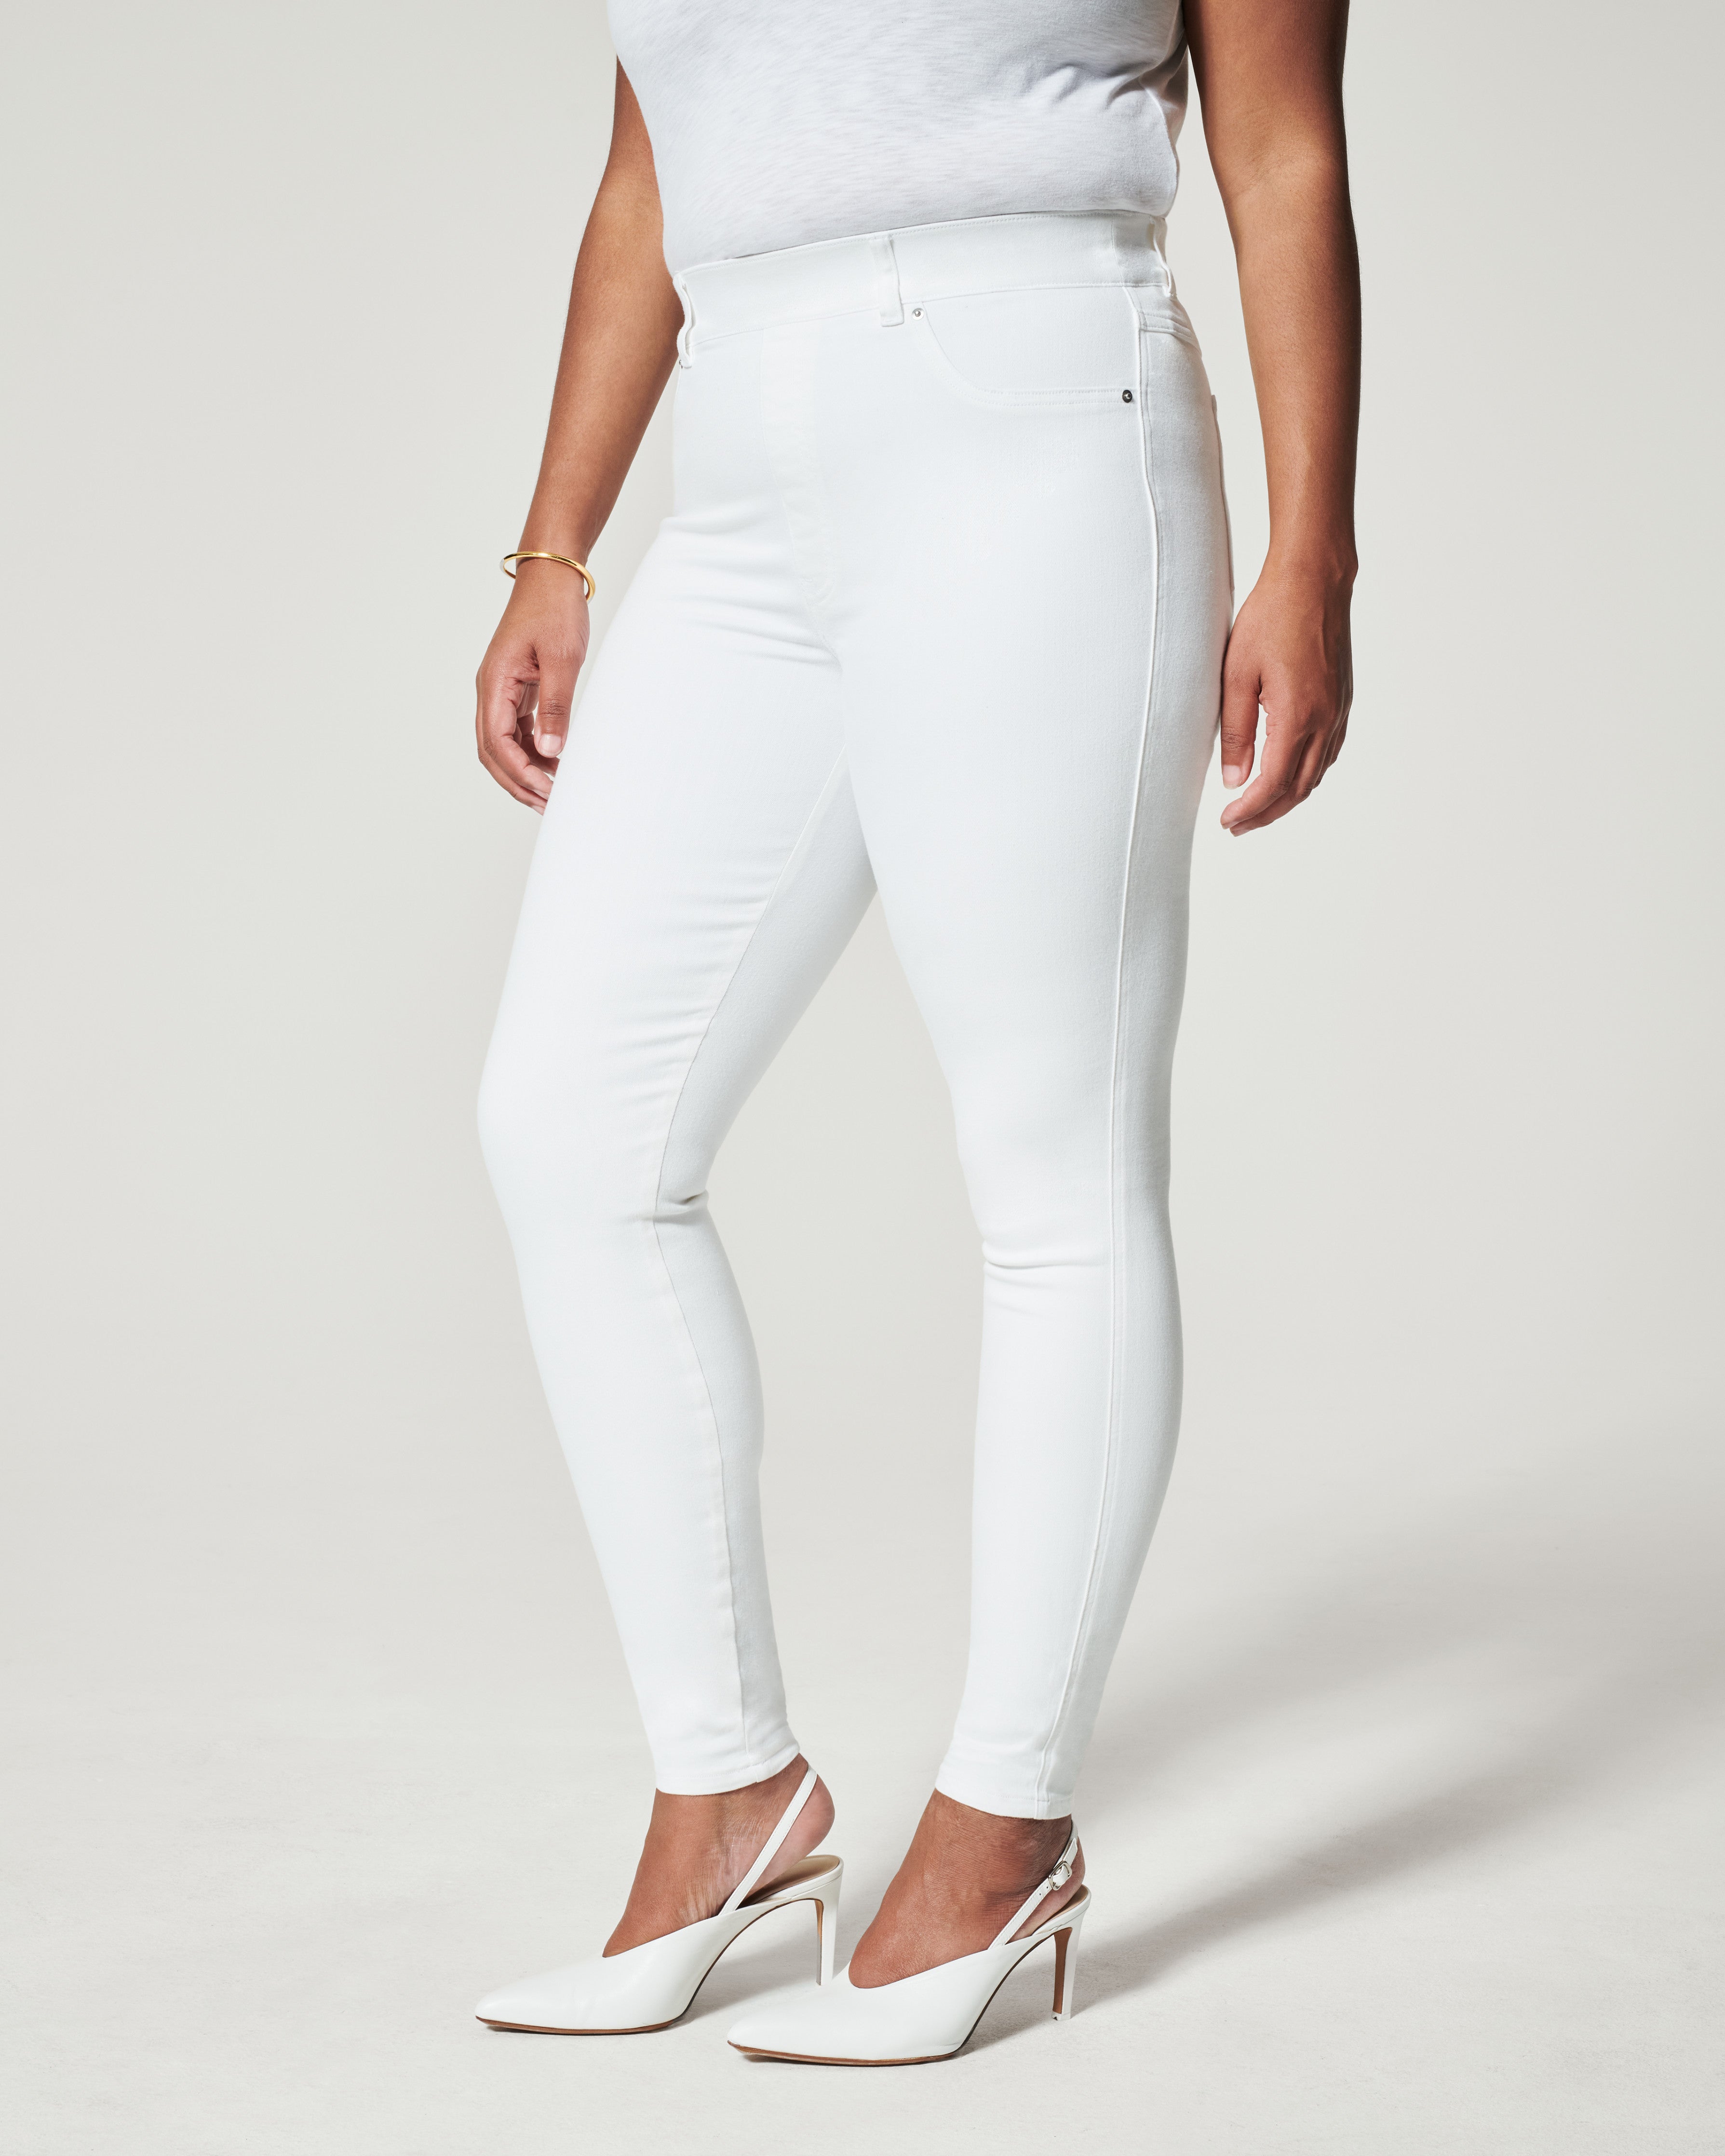 SPANX, Pants & Jumpsuits, Spanx Onthego White Ankle Slim Straight Pants